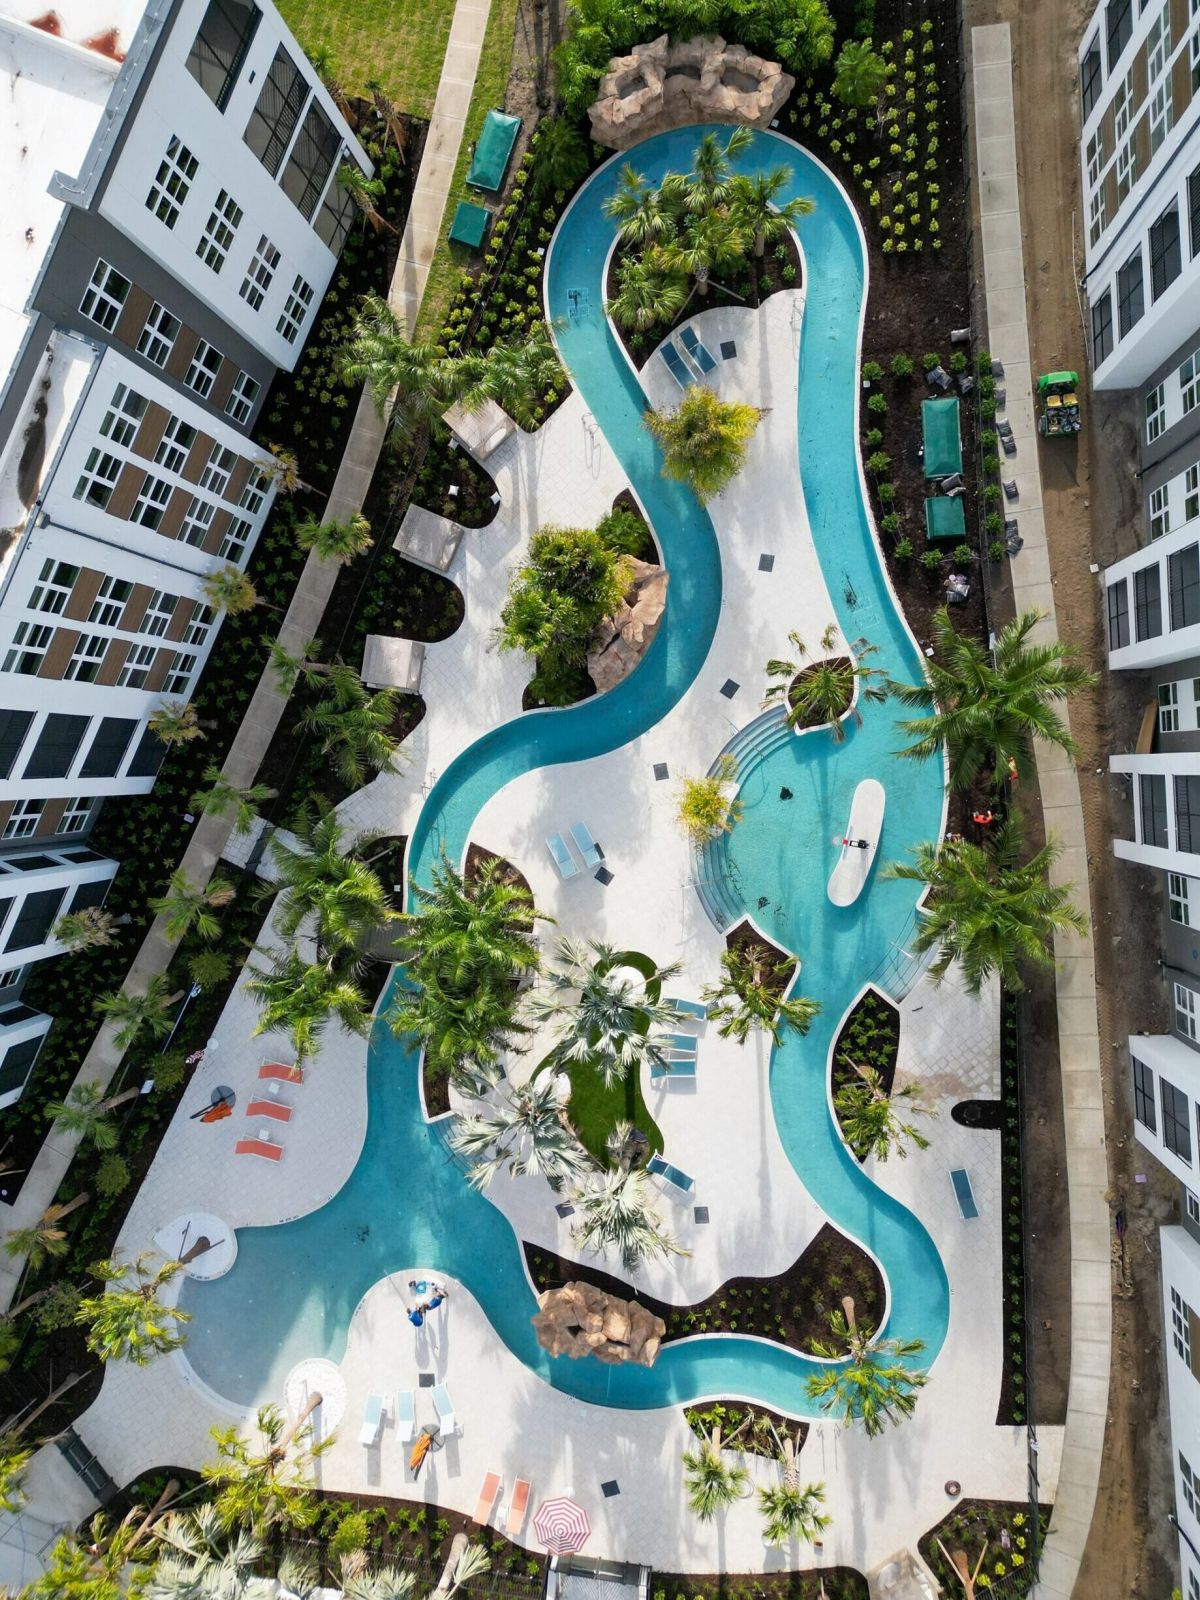 Aerial view of our 23,000 sq. ft. lazy river surrounded by trees and lounge chairs at The Lucent at Sunrise